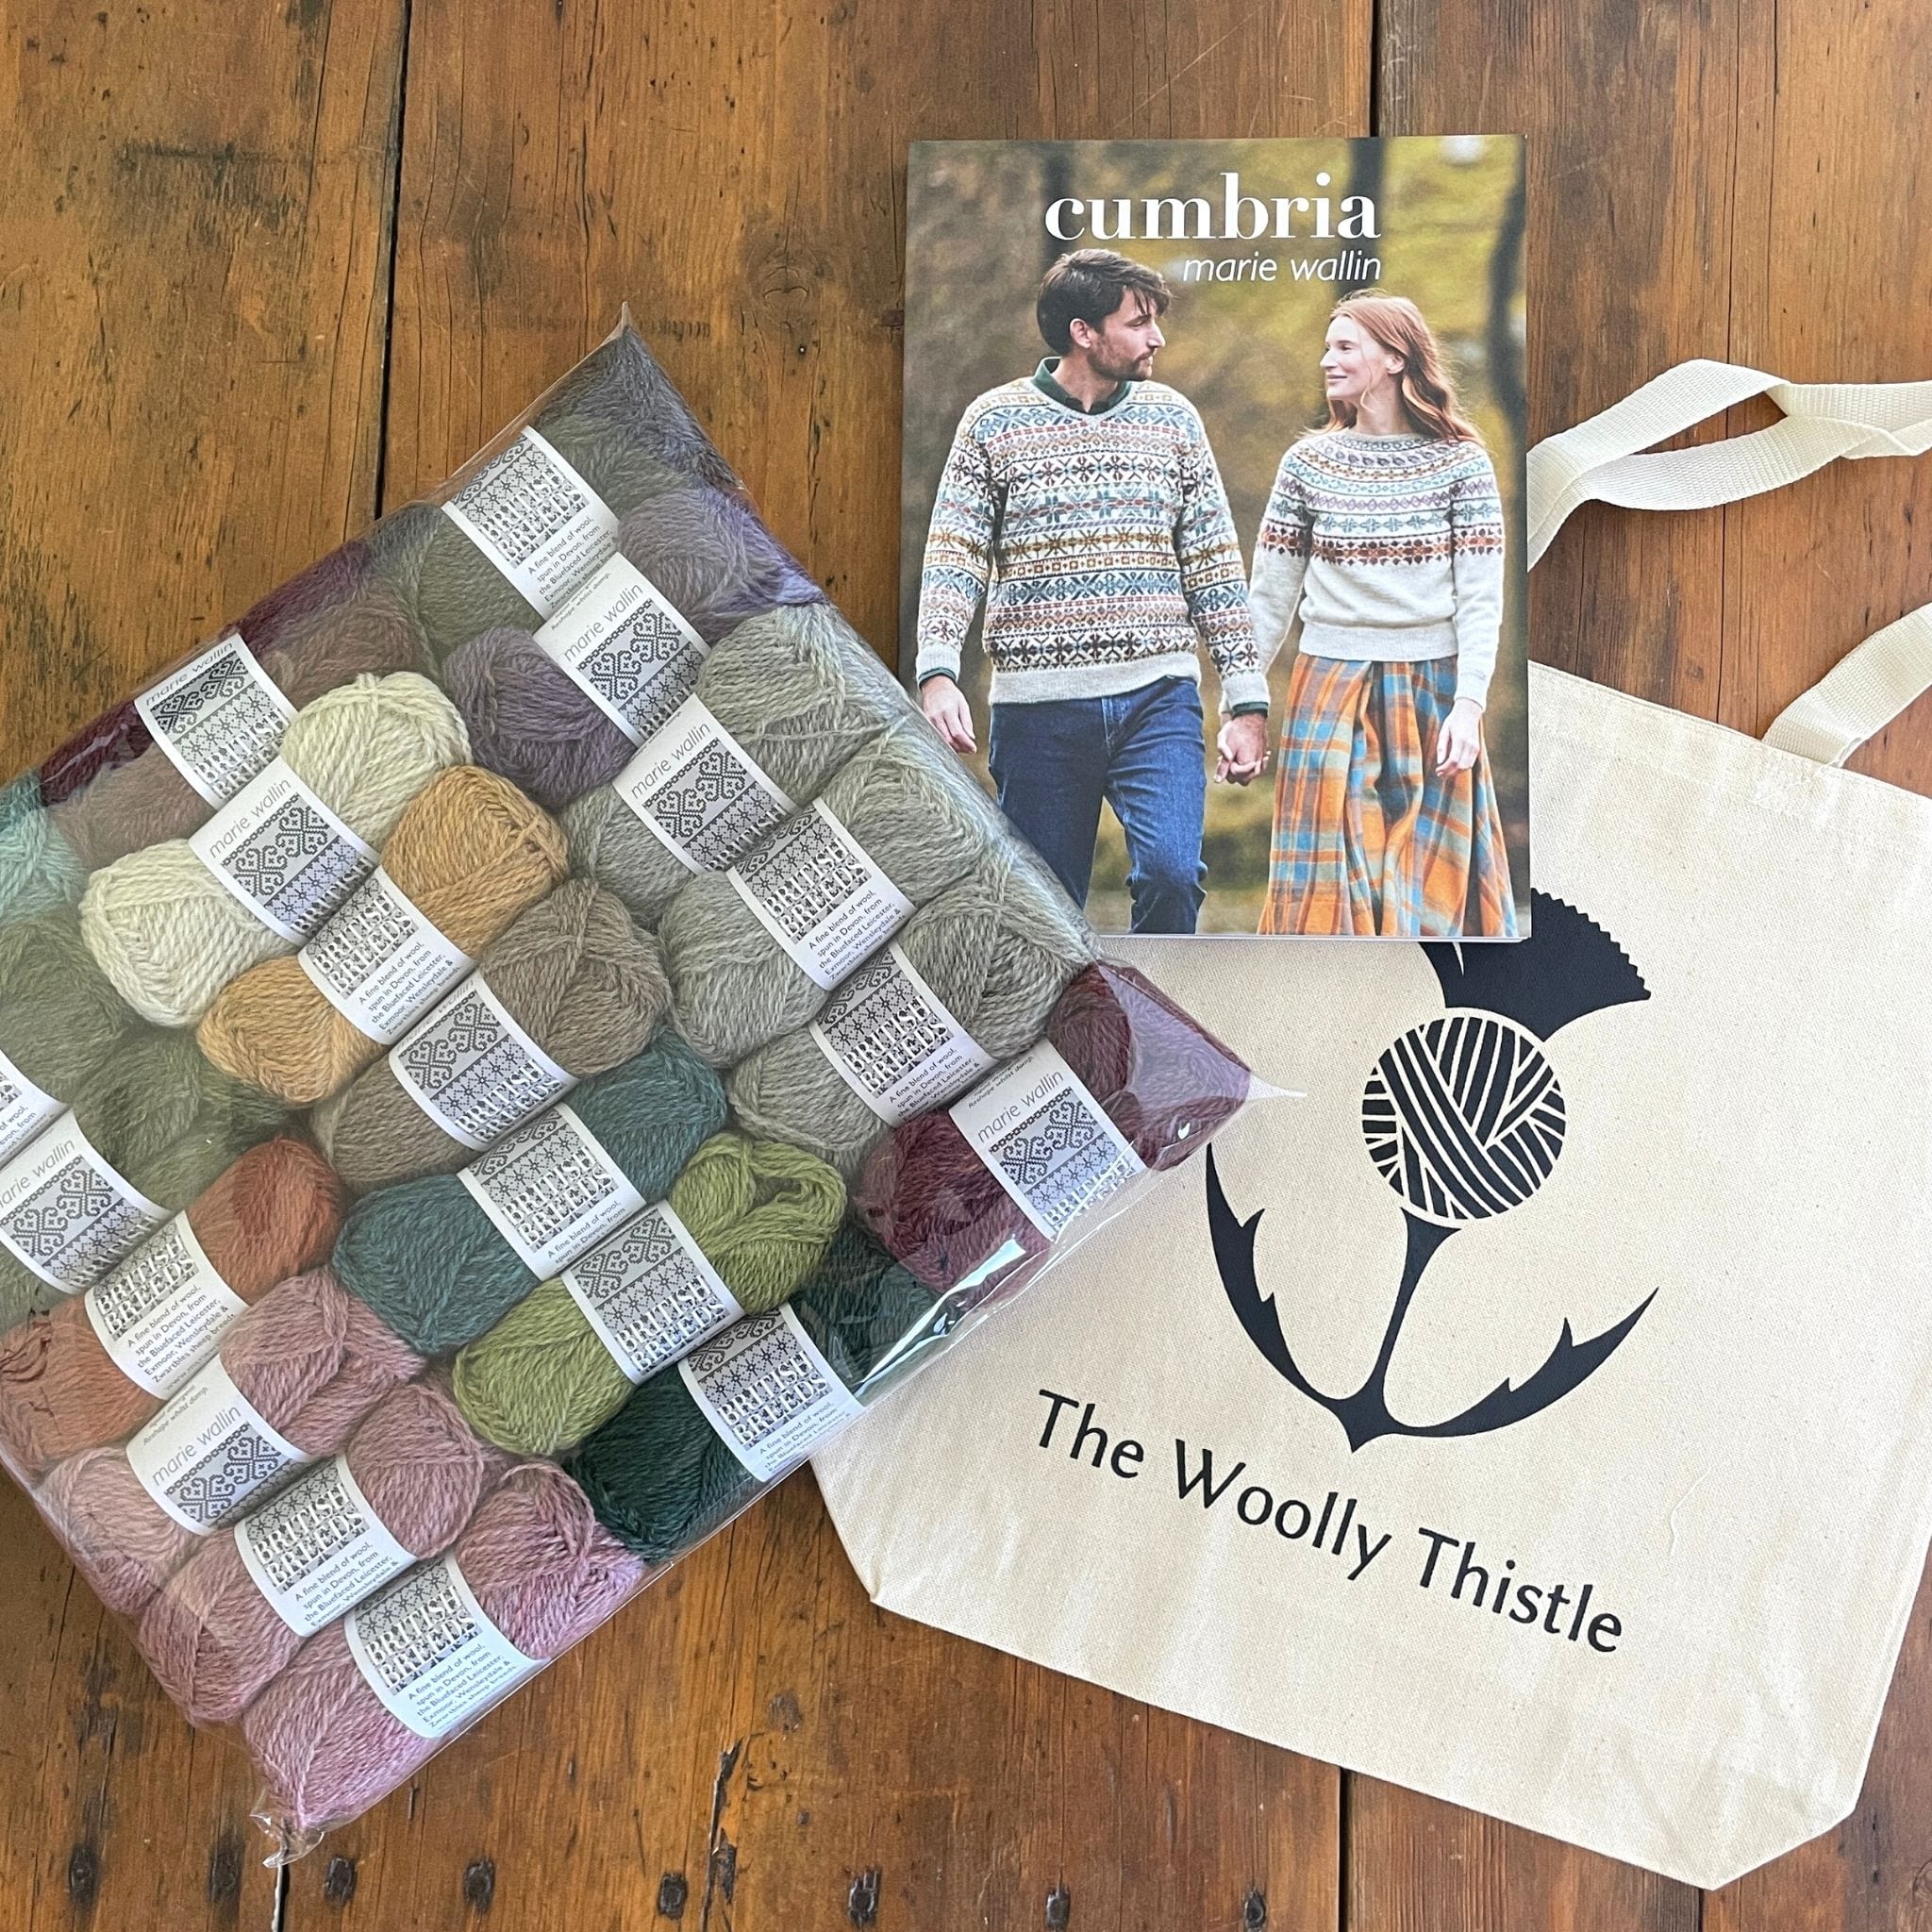 Components (yarn, book, and tote) for Keris Kit from Marie Wallin book Cumbria